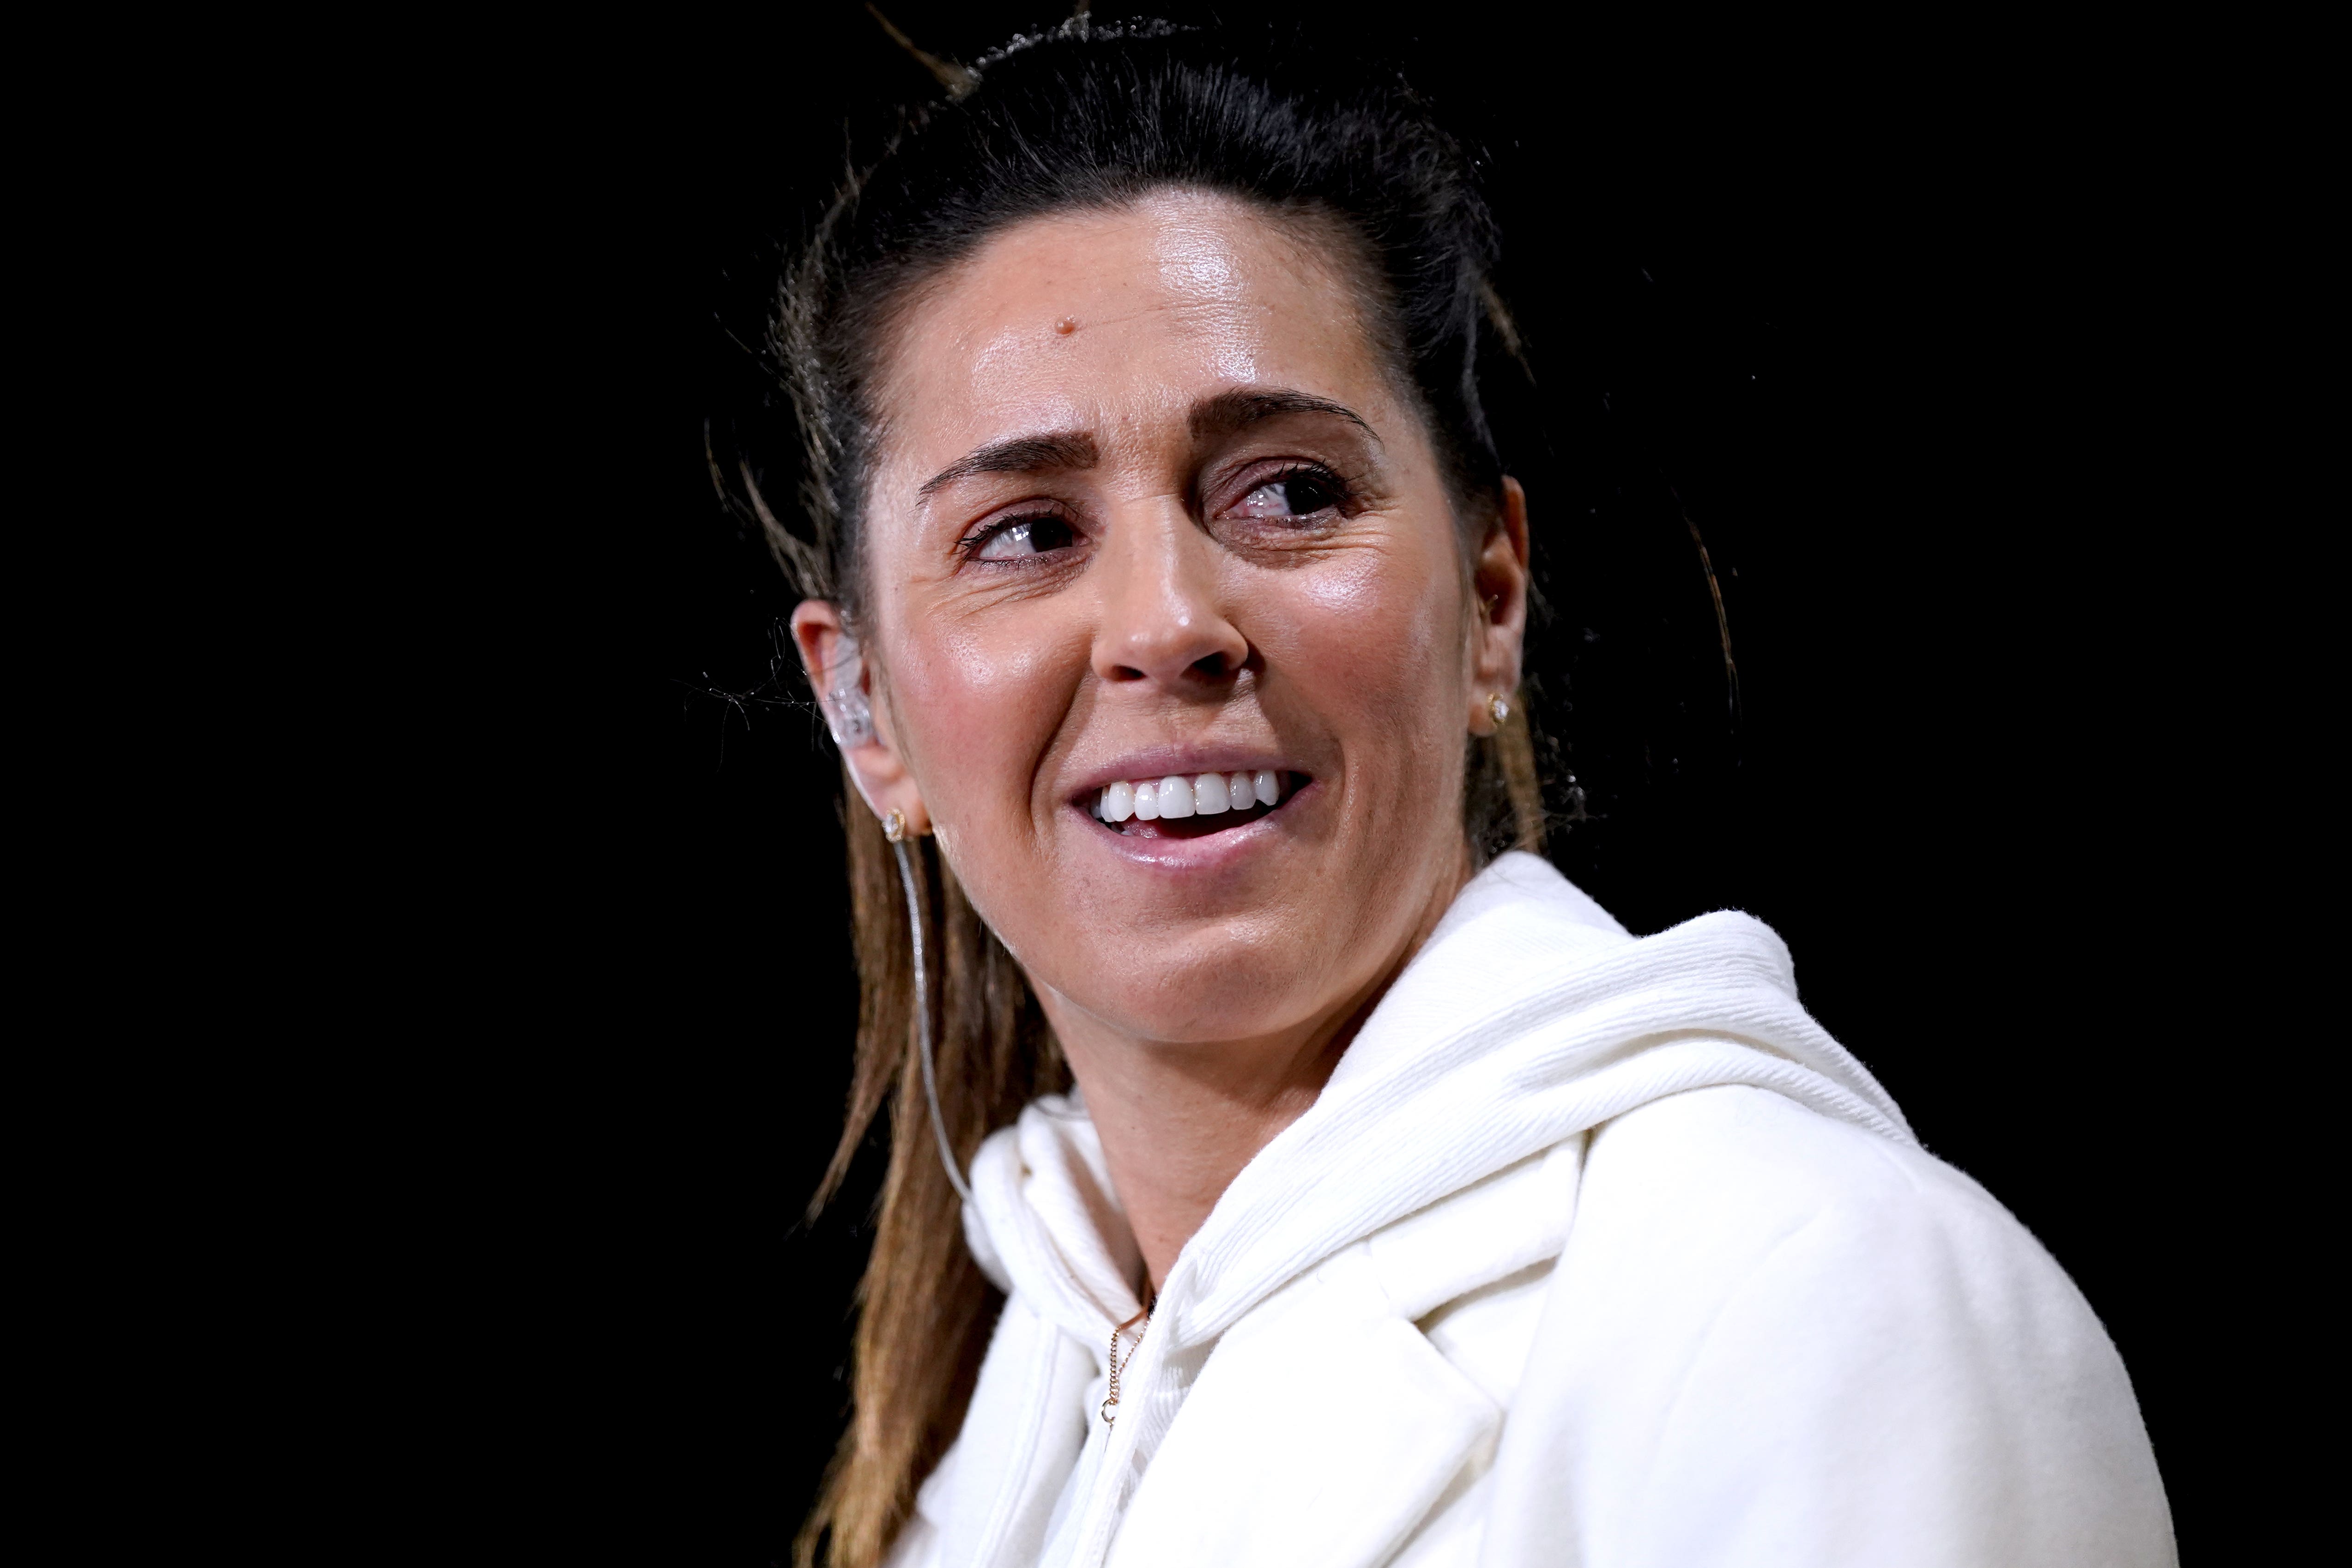 Fara Williams has spoken about a lack of diversity among England’s national team